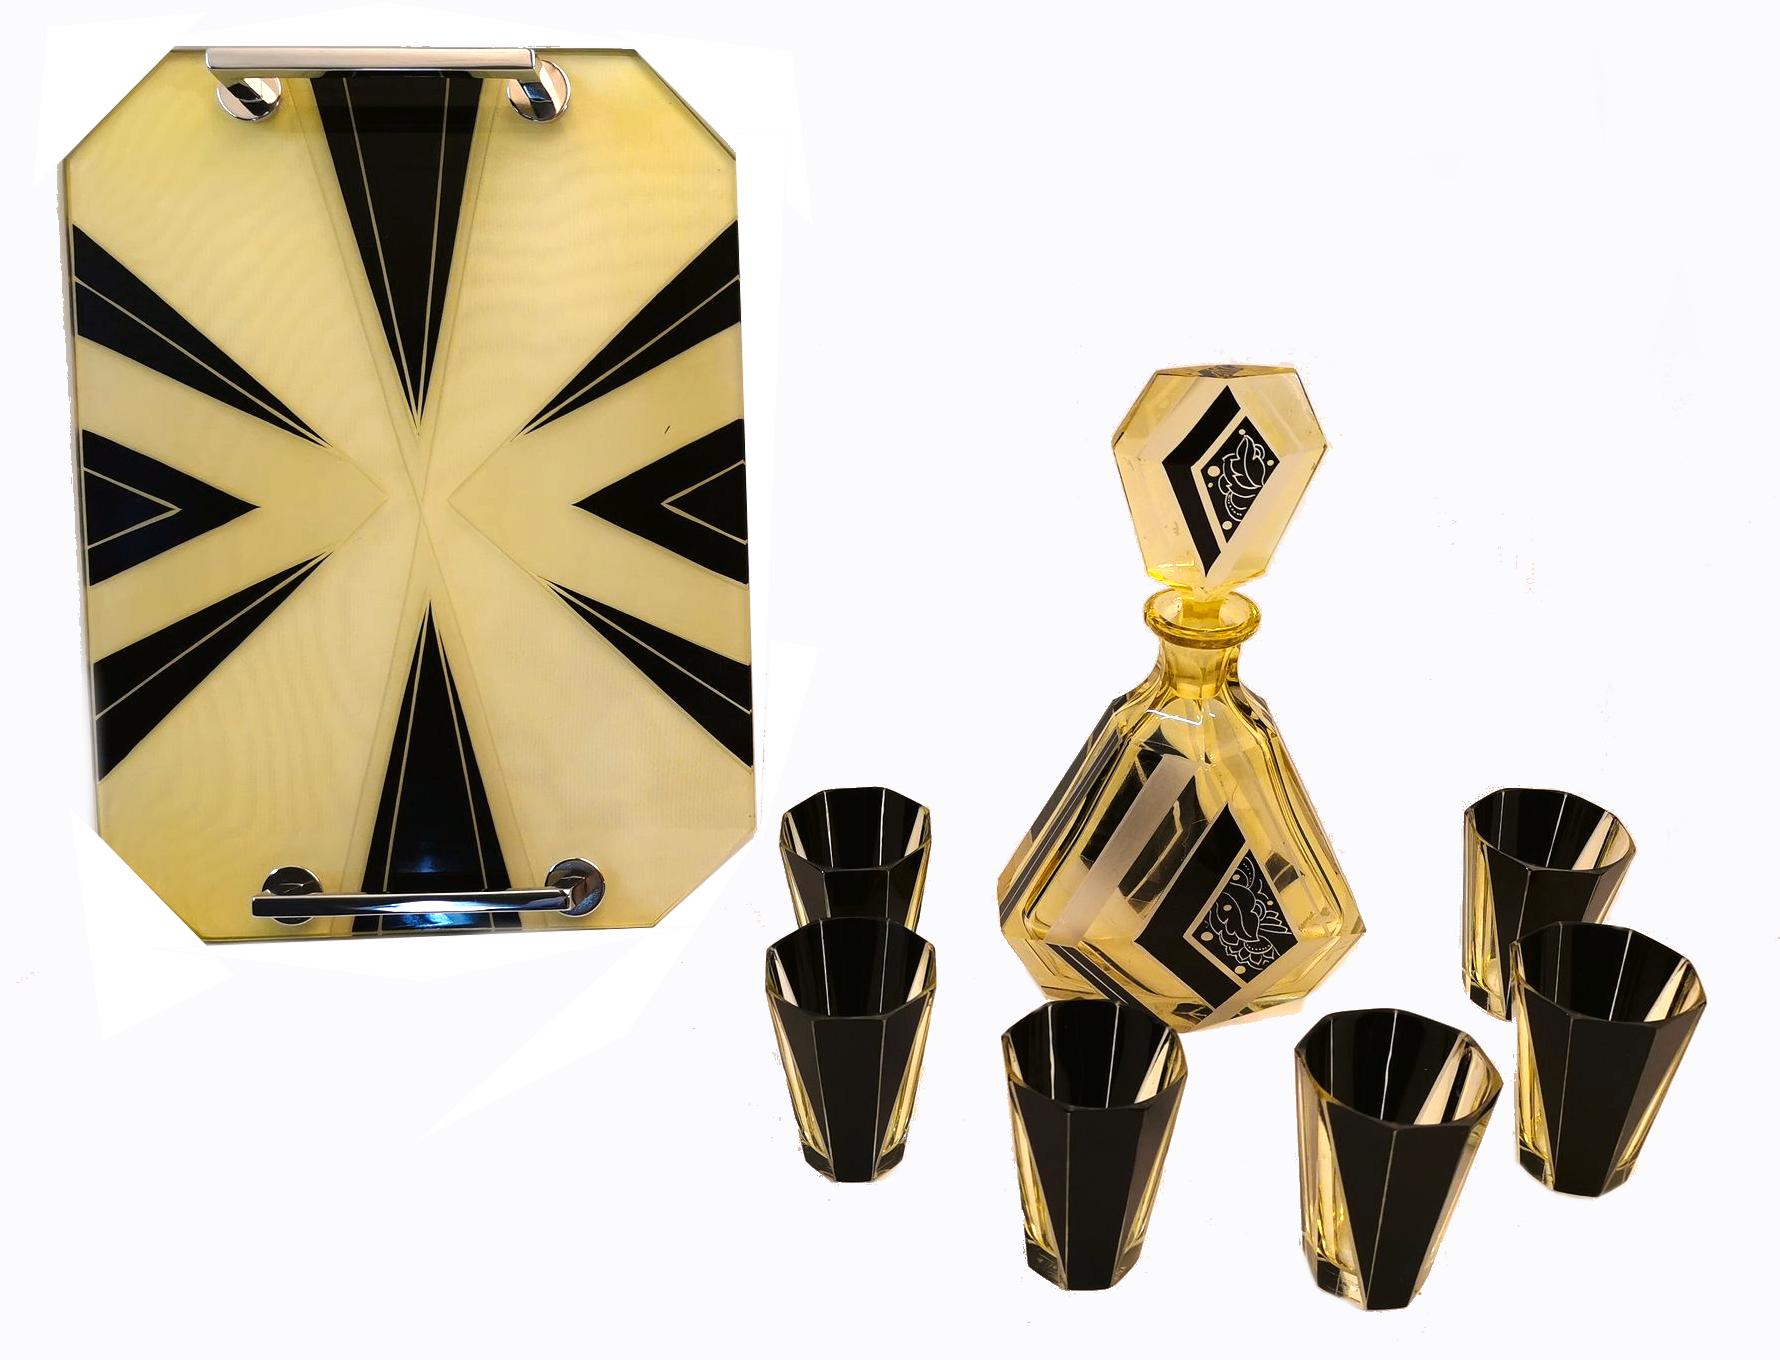 Very high quality, very striking looking 1930's Art Deco Czech glass decanter set. Features a classic shape decanter with large over sized stopper and six decent sized shot glasses and if that wasn't enough it even has a matching tray. The tray